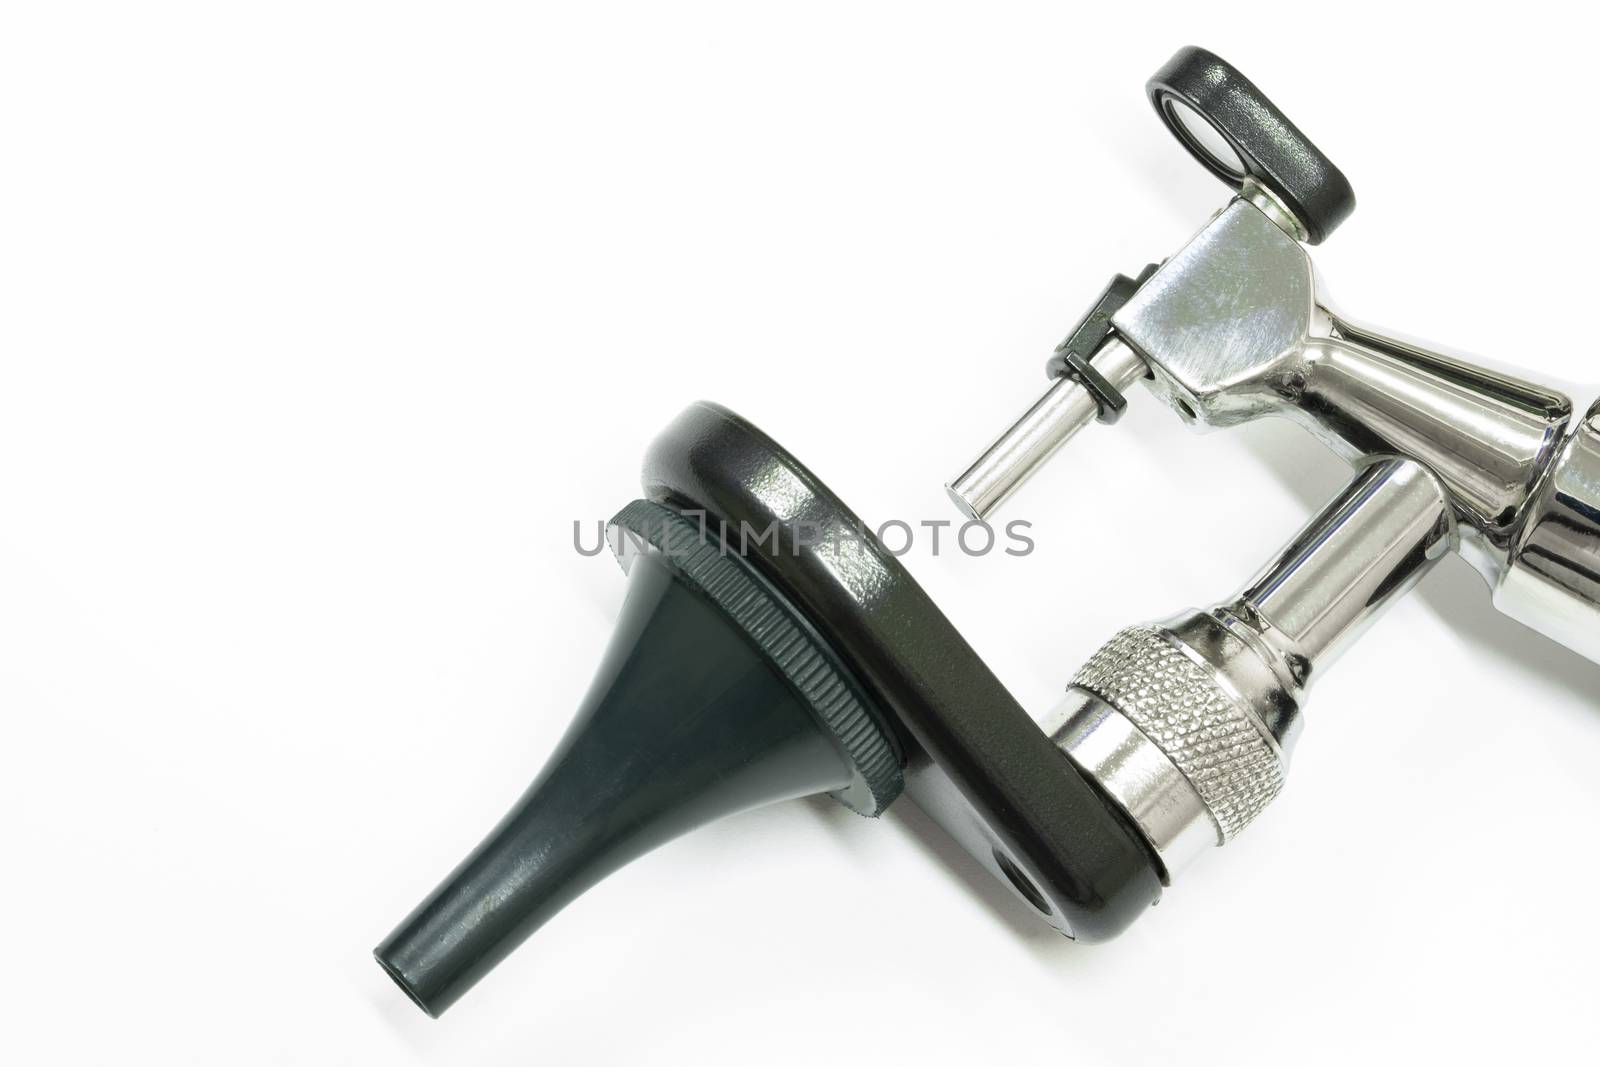 an otoscope, made of stainless steel, an important tool used by a otolaryngologist, or an ear doctor, to examime a patient's ear, isolated on white backgrown, closeup view